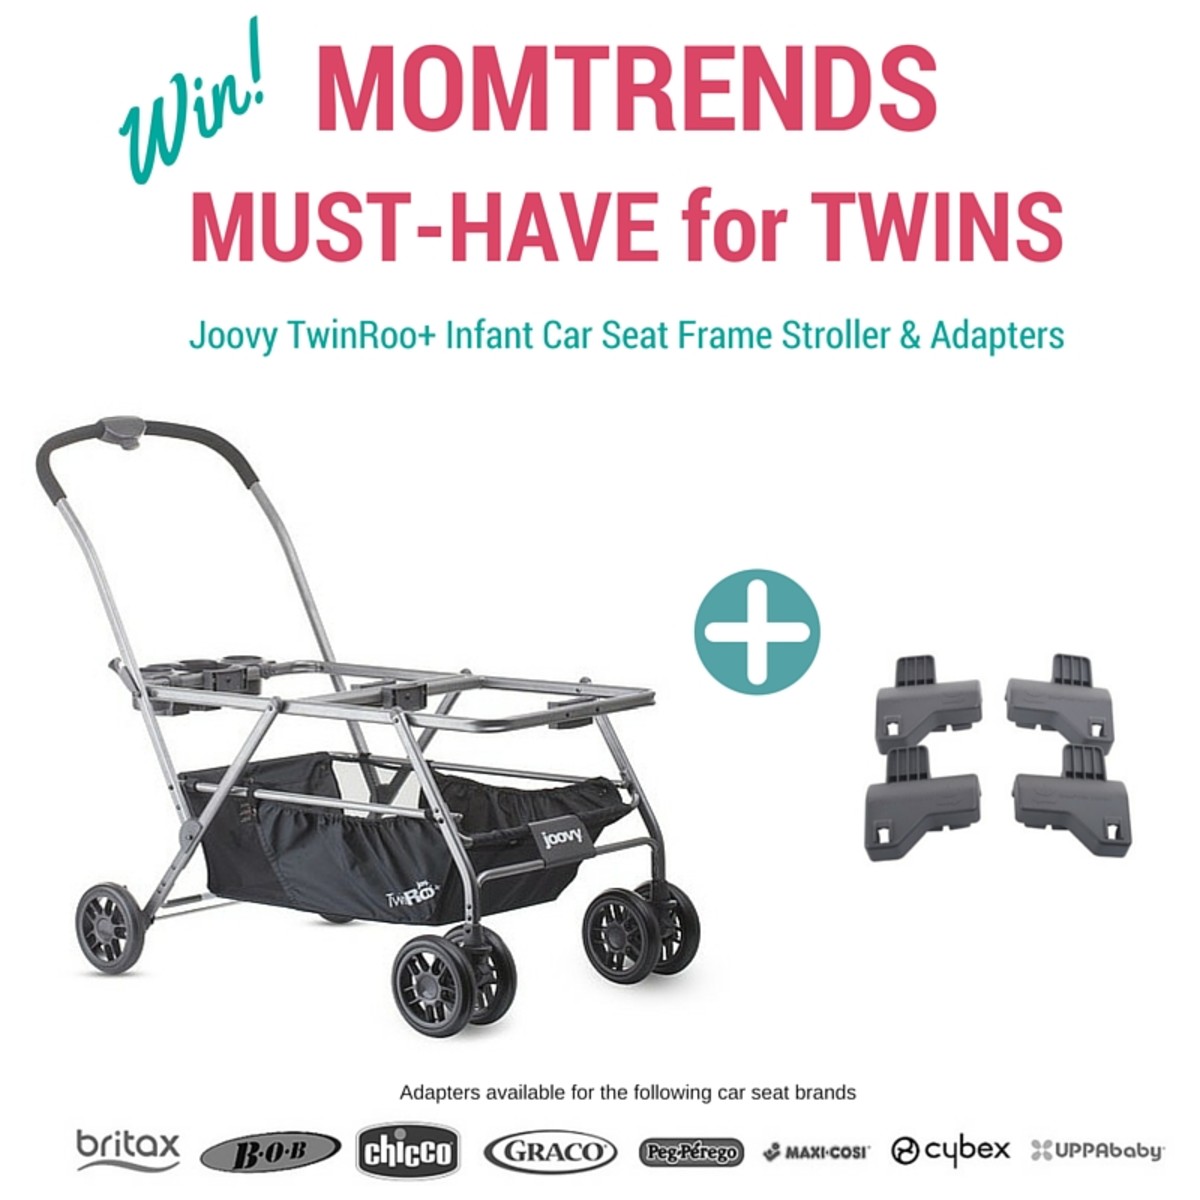 WIN a MOMTRENDS MUST-HAVE(1)